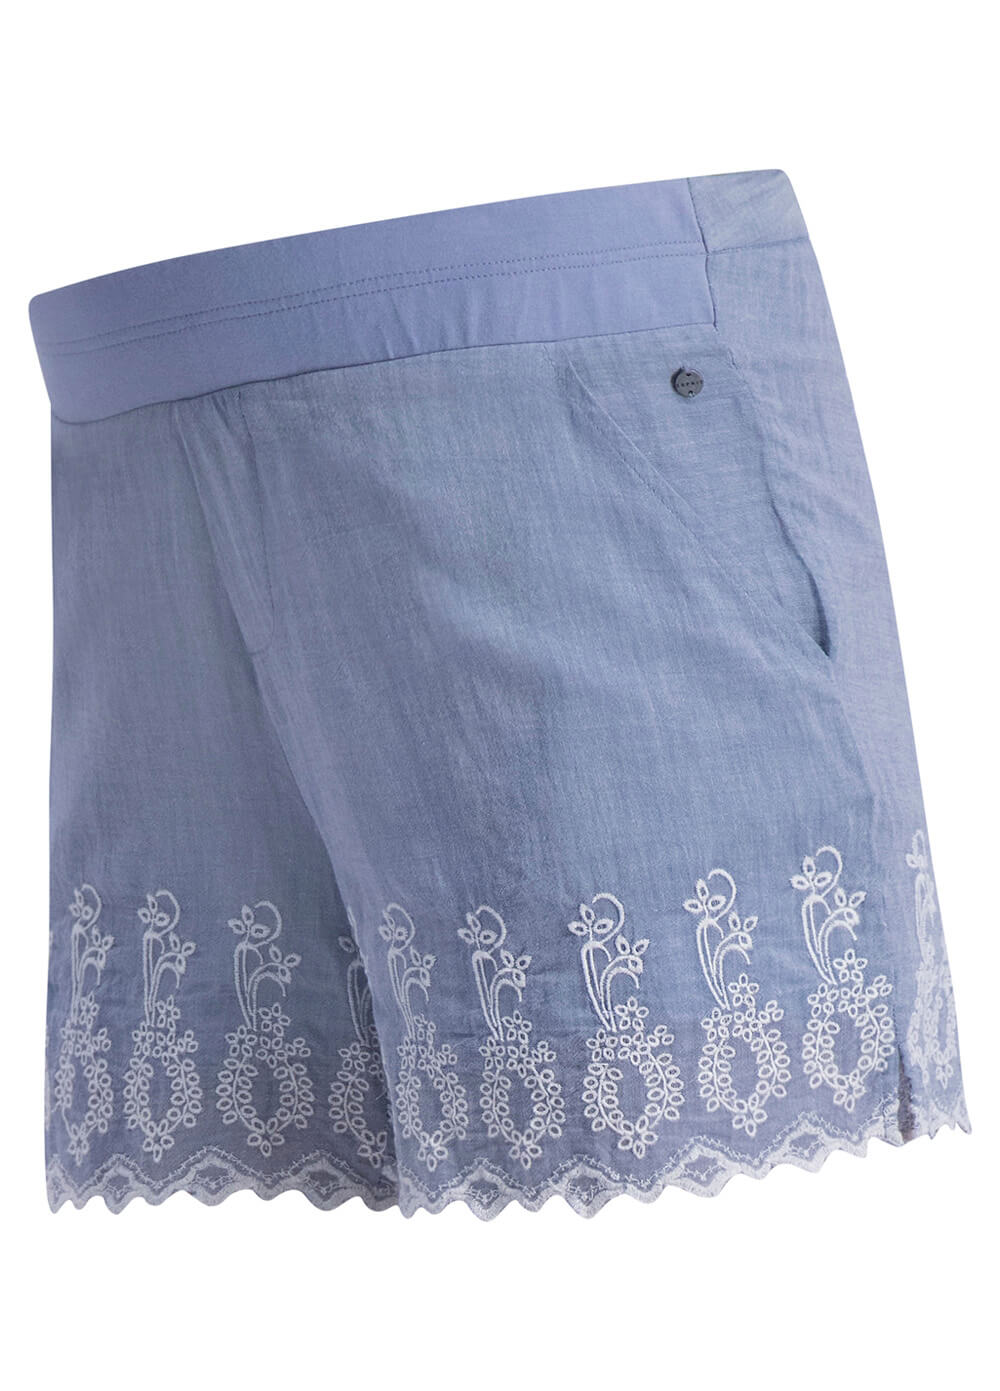 Embroidered Cotton Maternity Shorts in Blue by Esprit